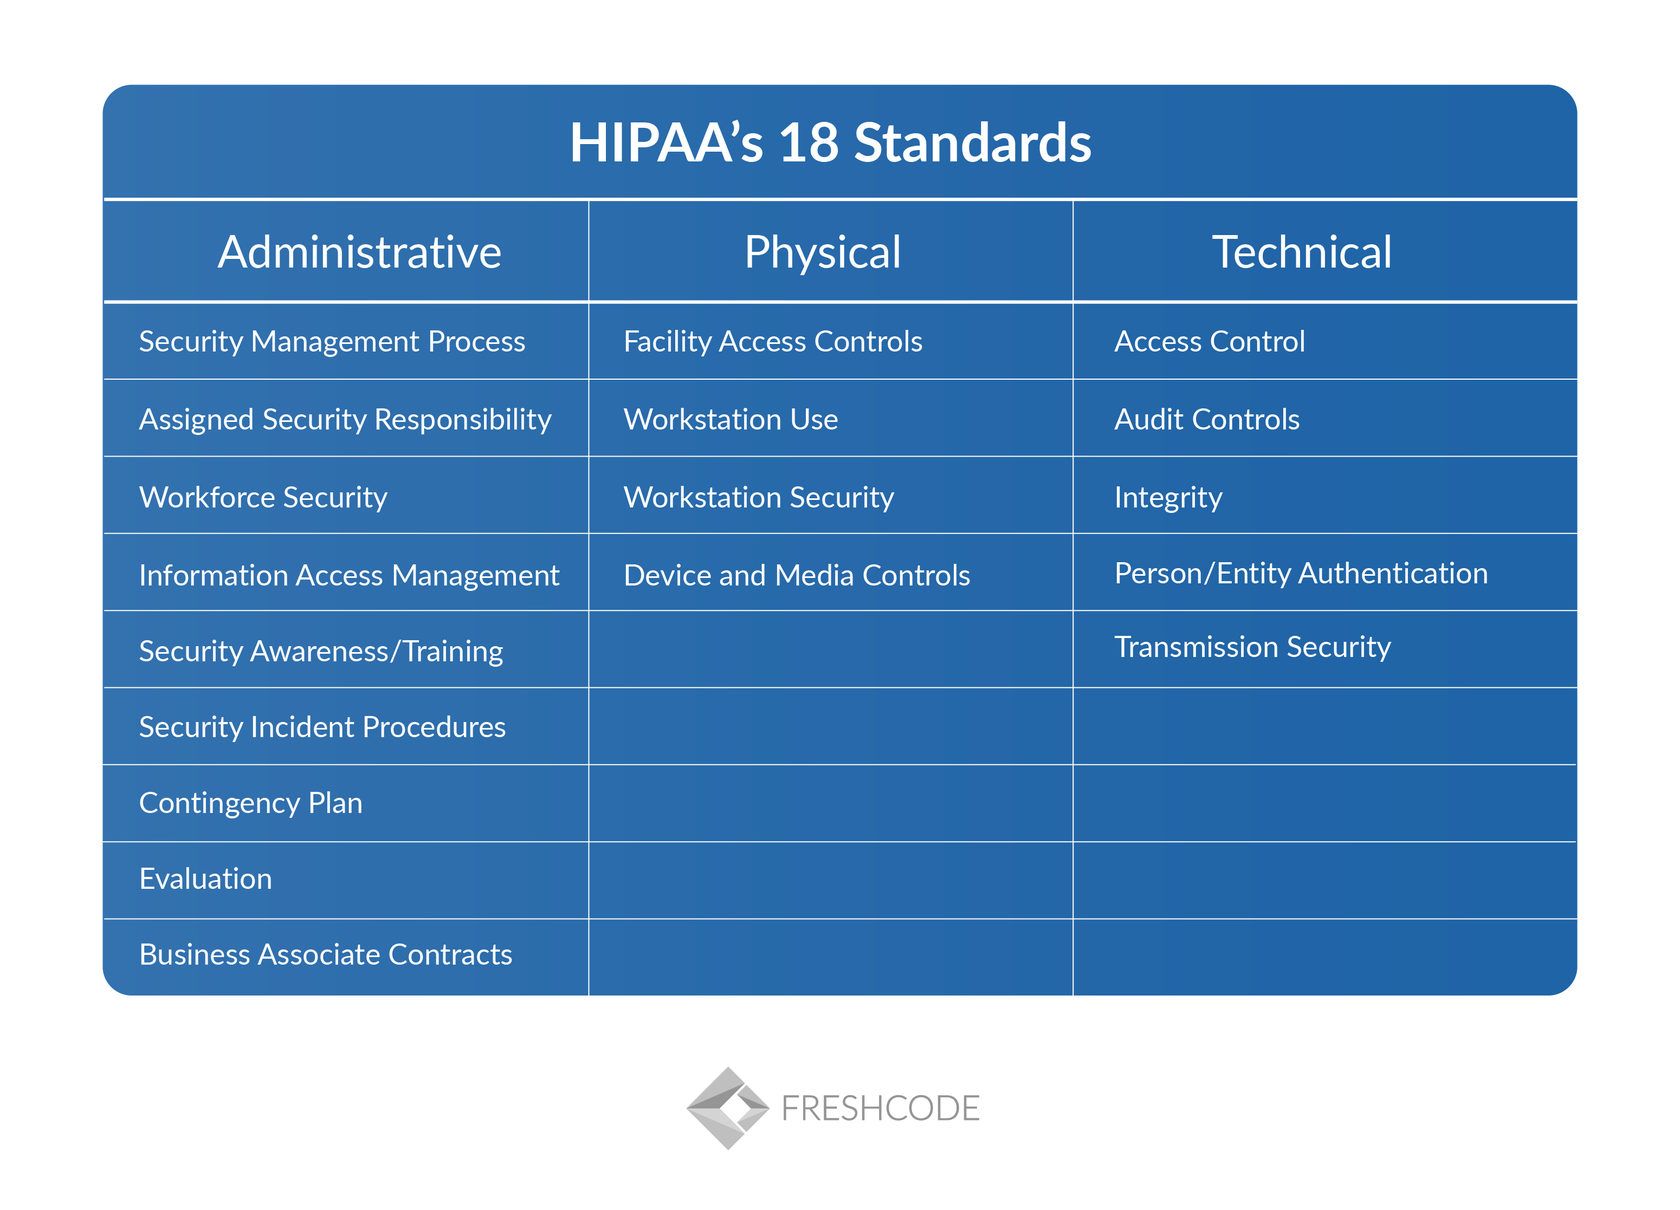 HIPAA Requirements for Web Hosting